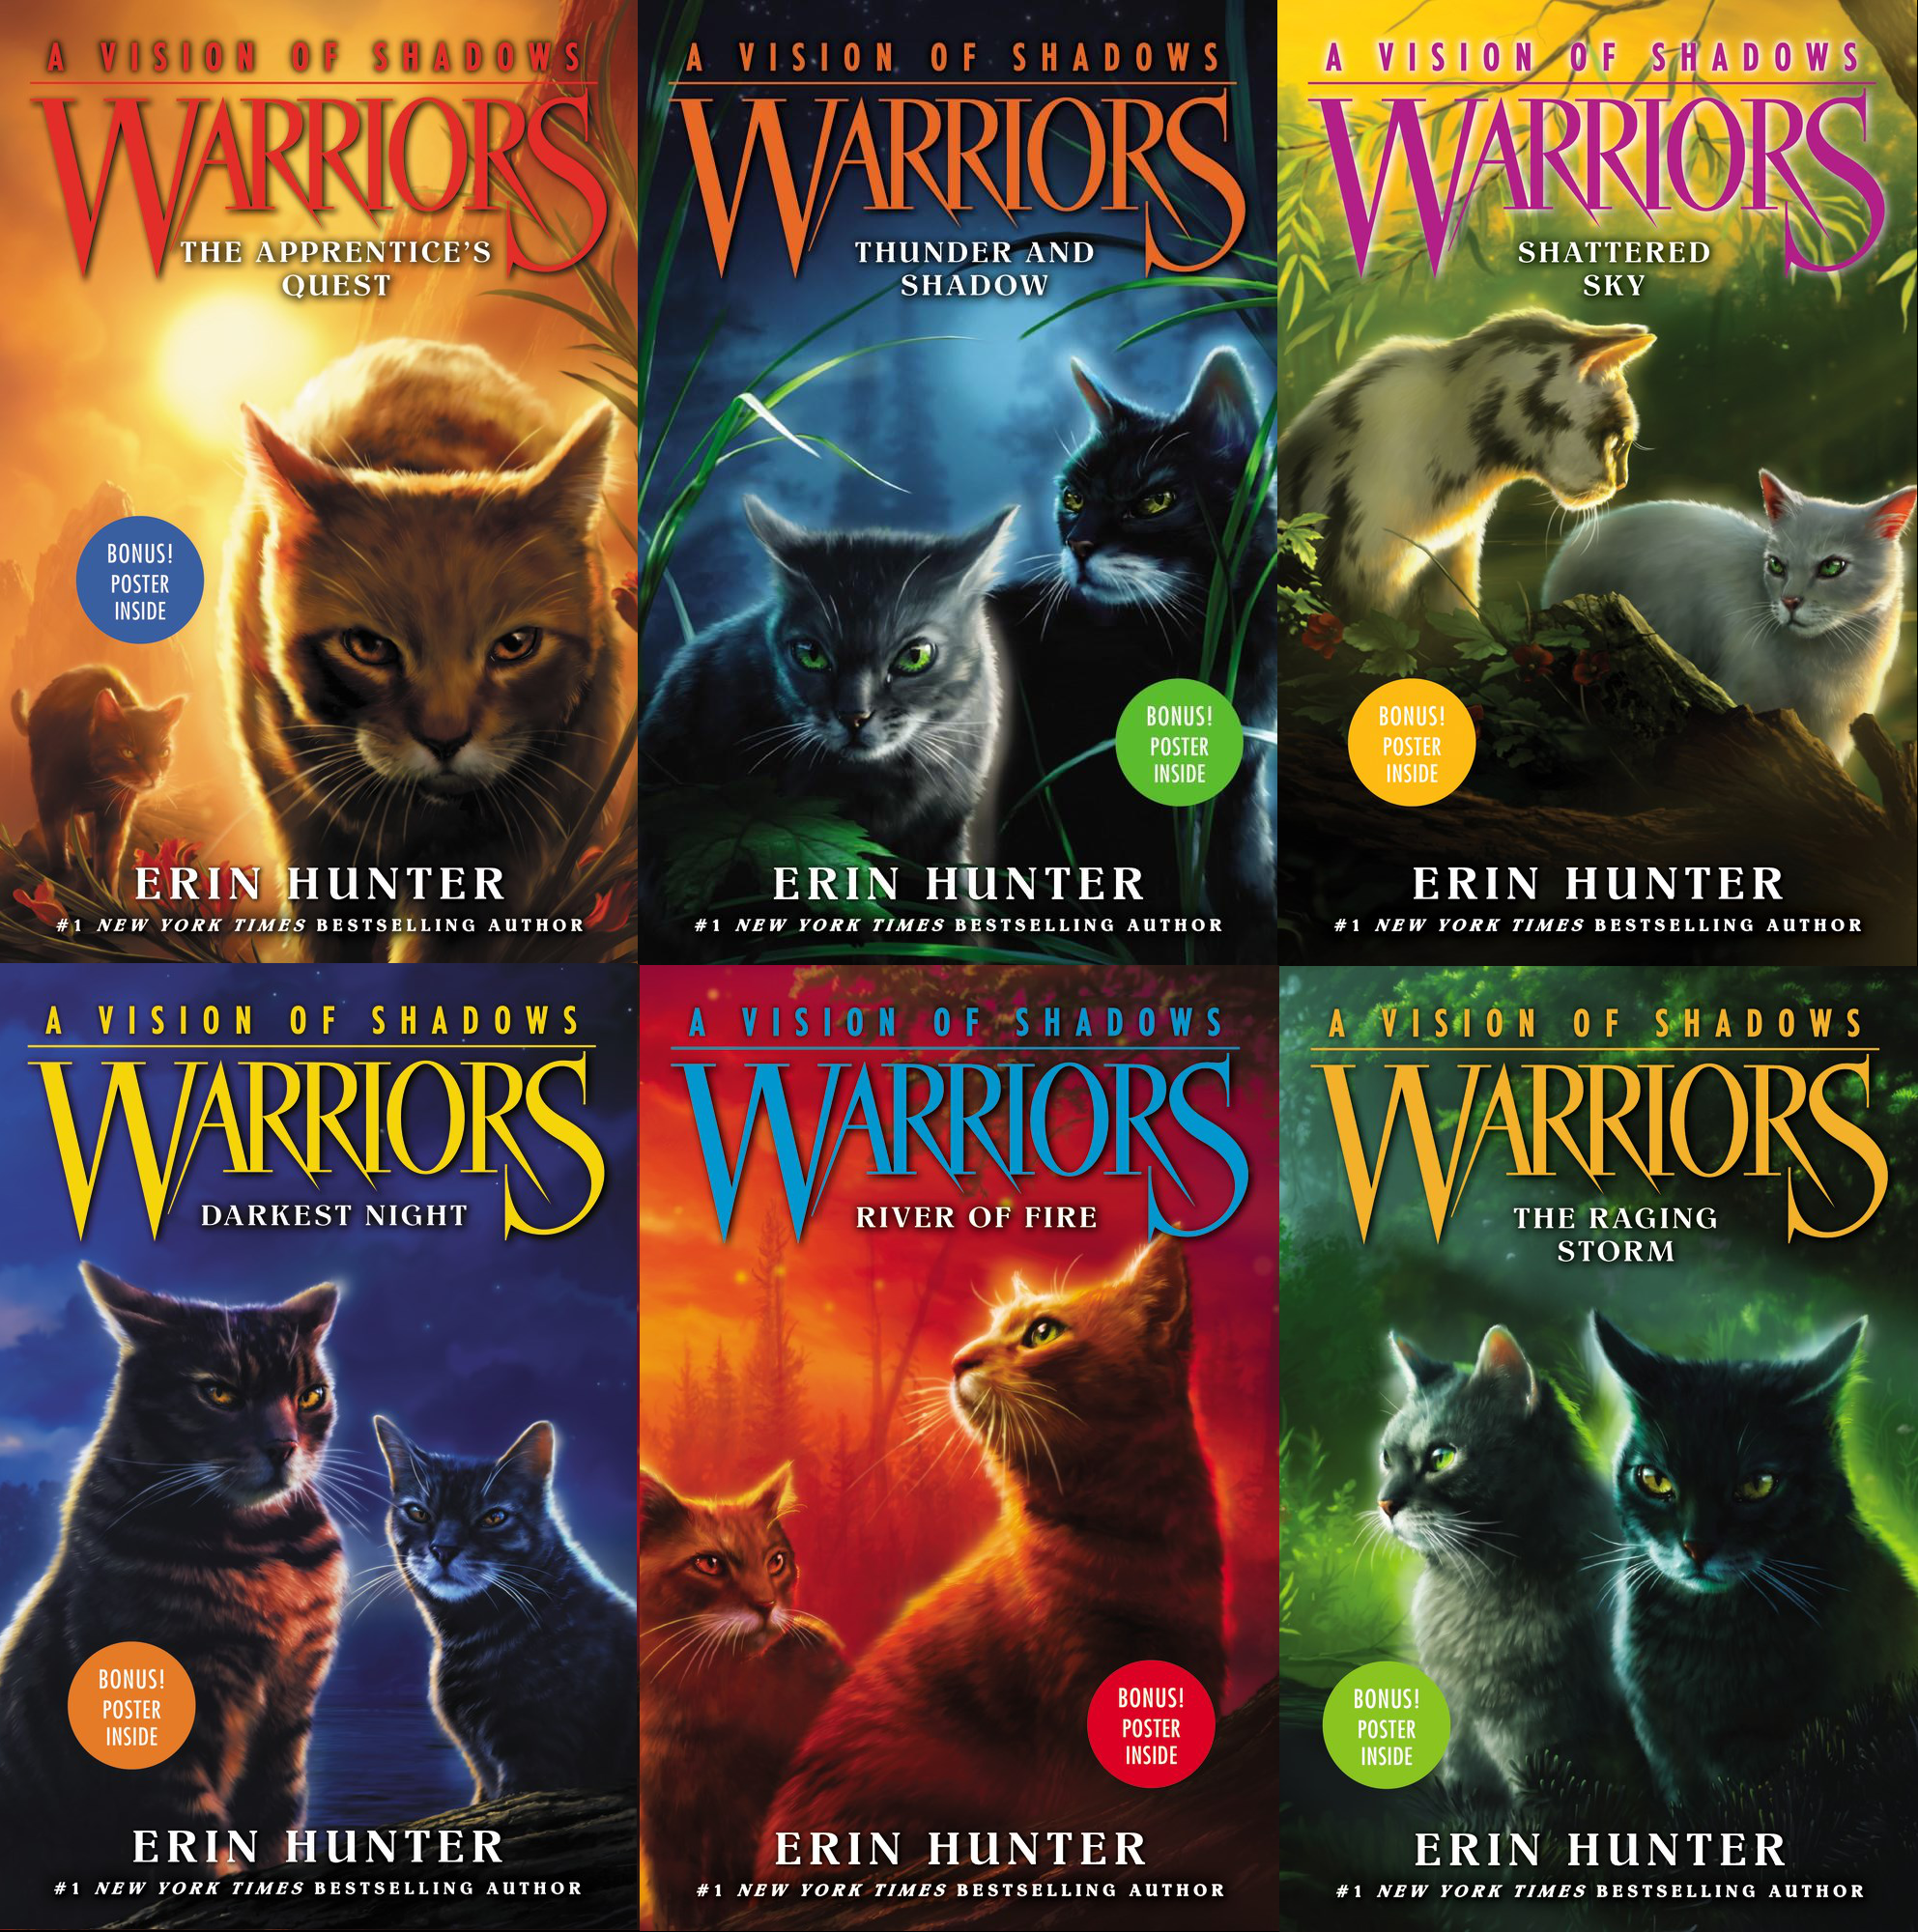 Warriors Cat Power of Three Book 1-6 Series 3 Book Collection Set By Erin  HunteR